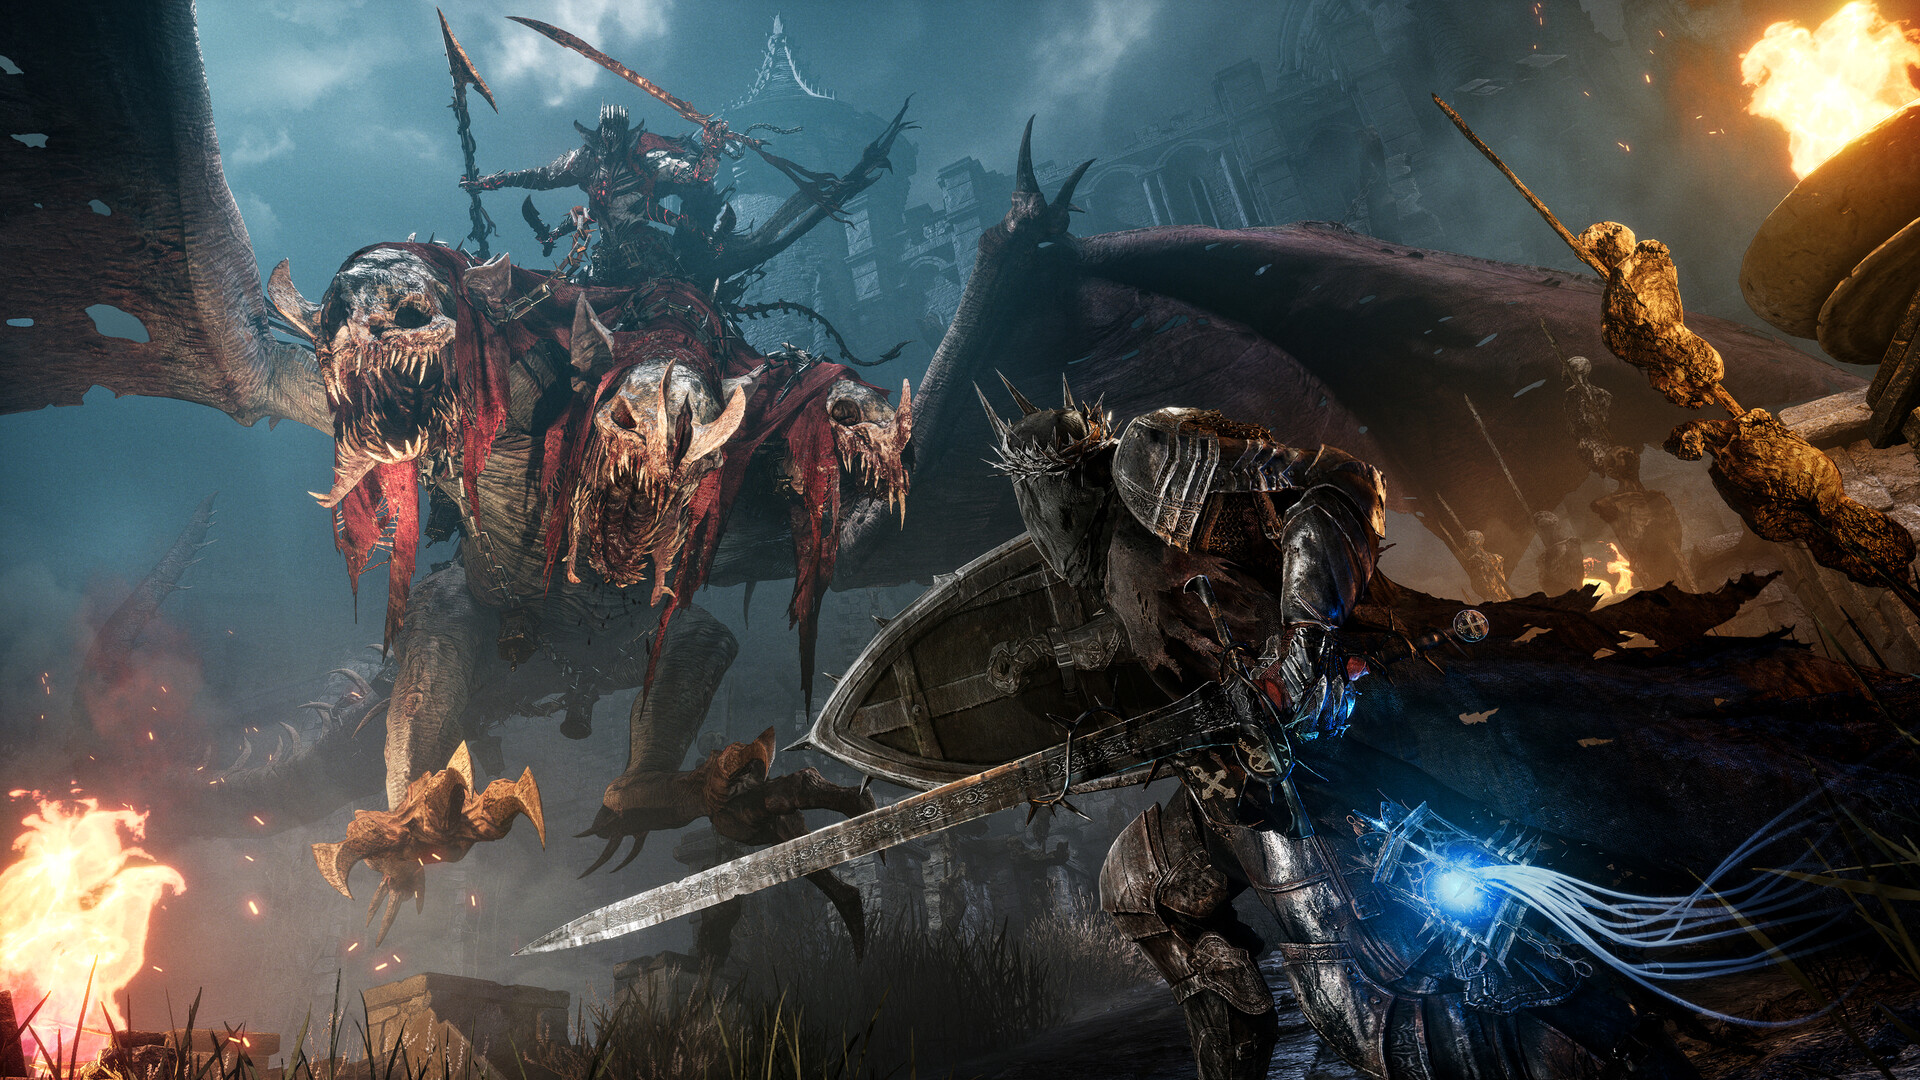 Lords of the Fallen (2023) System Requirements